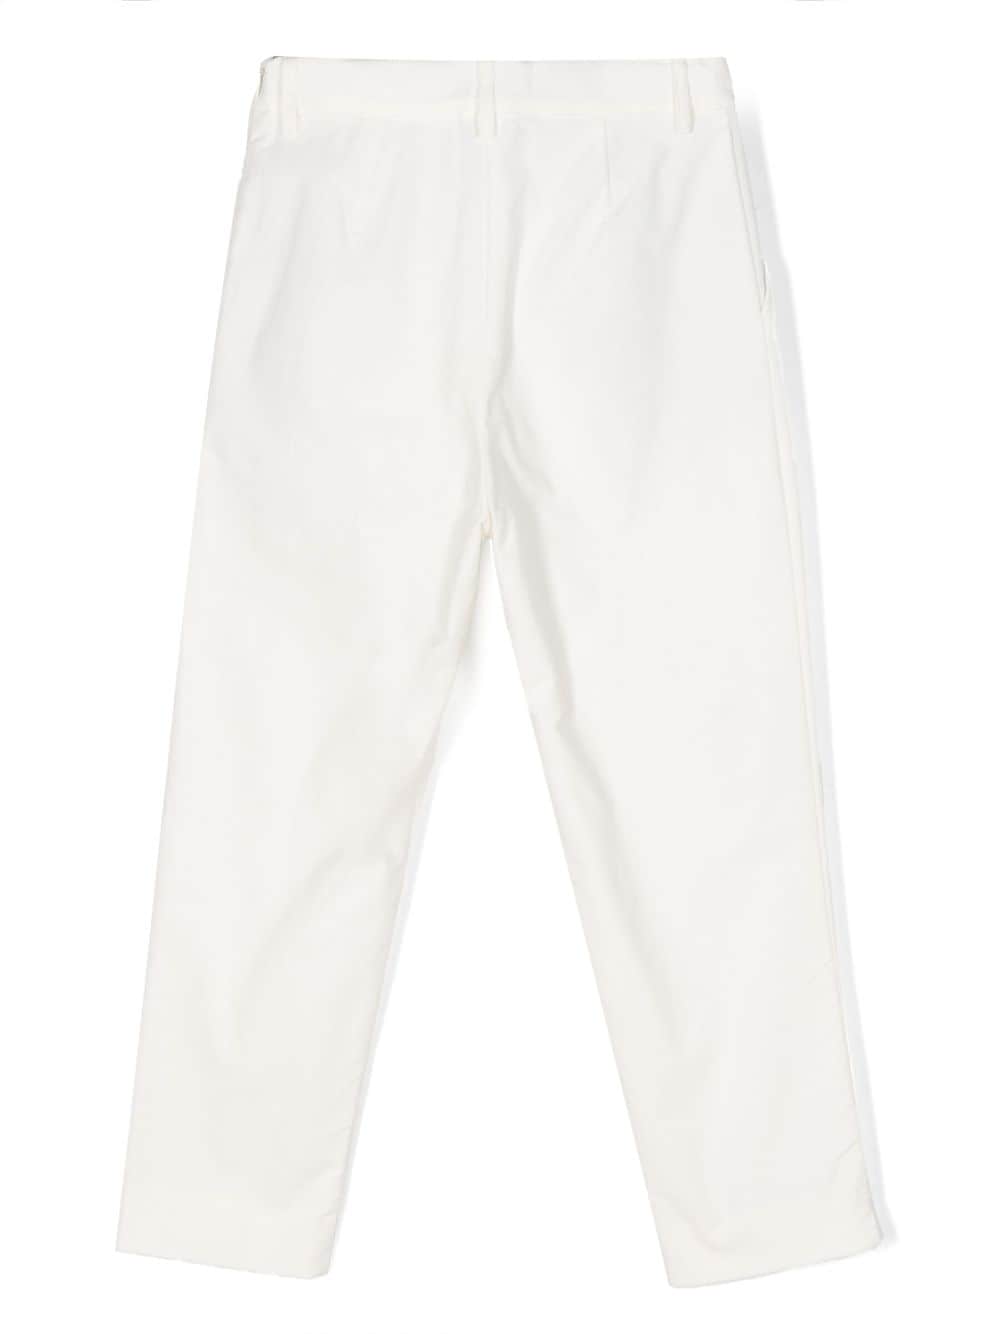 White trousers for girls